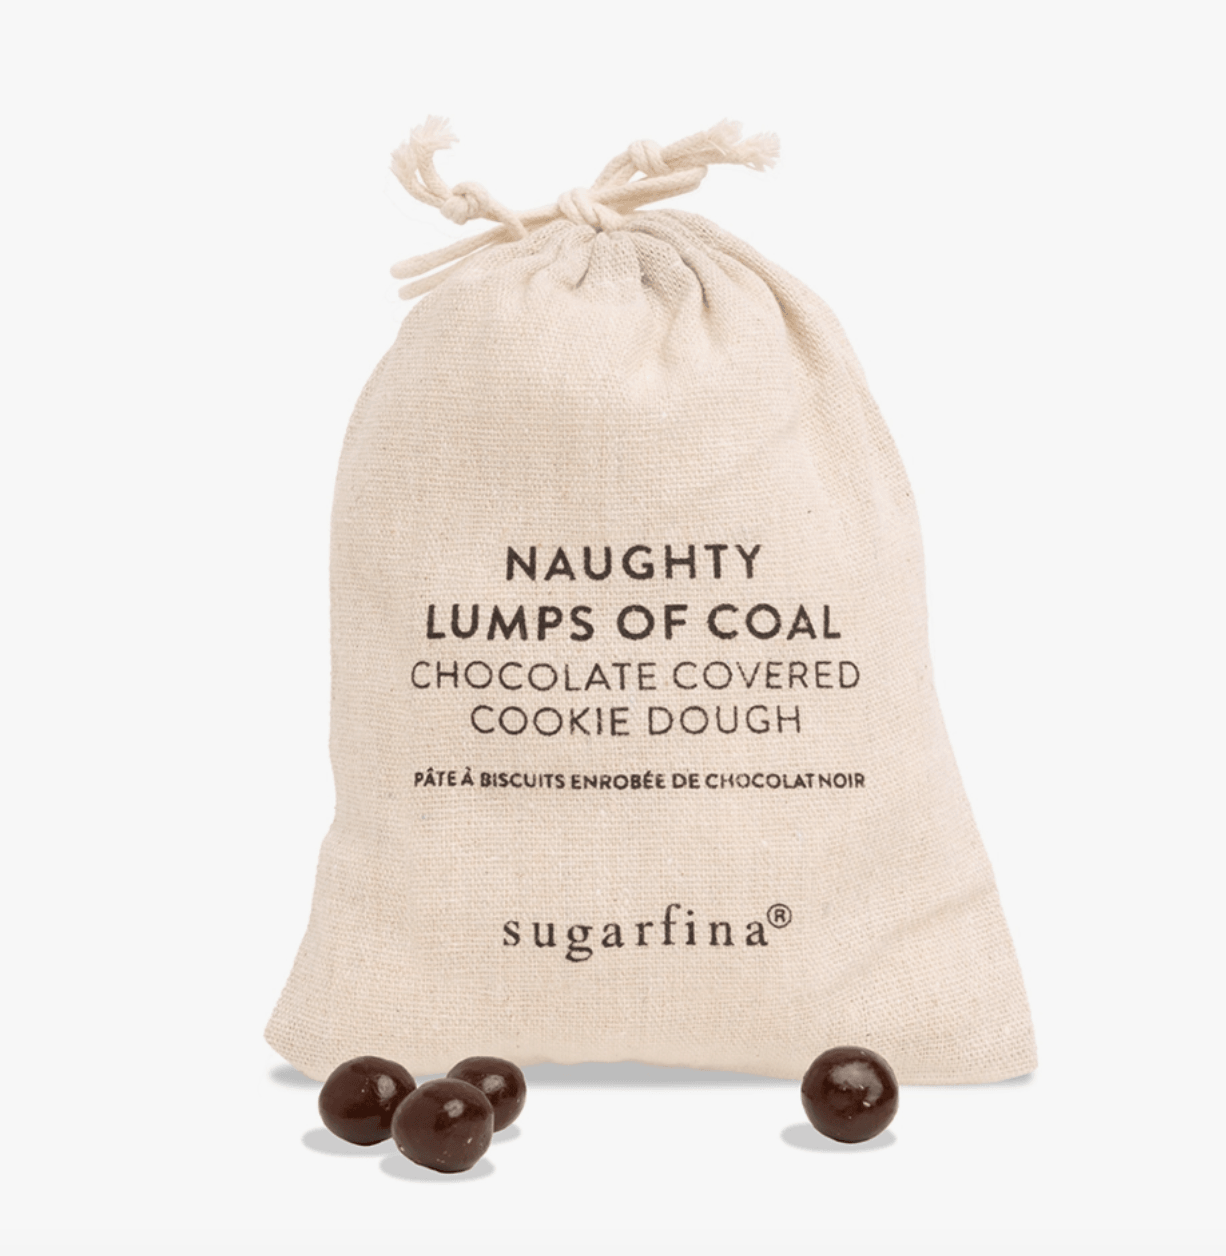 SUGARFINA NAUGHTY CHOCOLATE COVERED COOKIE DOUGH CANISTER , , It's NOMB , HOLIDAY GIFTS UNDER 30, STOCKING STUFFER, stocking stuffers, SUGARFINA, SUGARFINA NAUGHTY CHOCOLATE COVERED COOKIE DOUGH CANISTER , It's NOMB , itsnomb.com